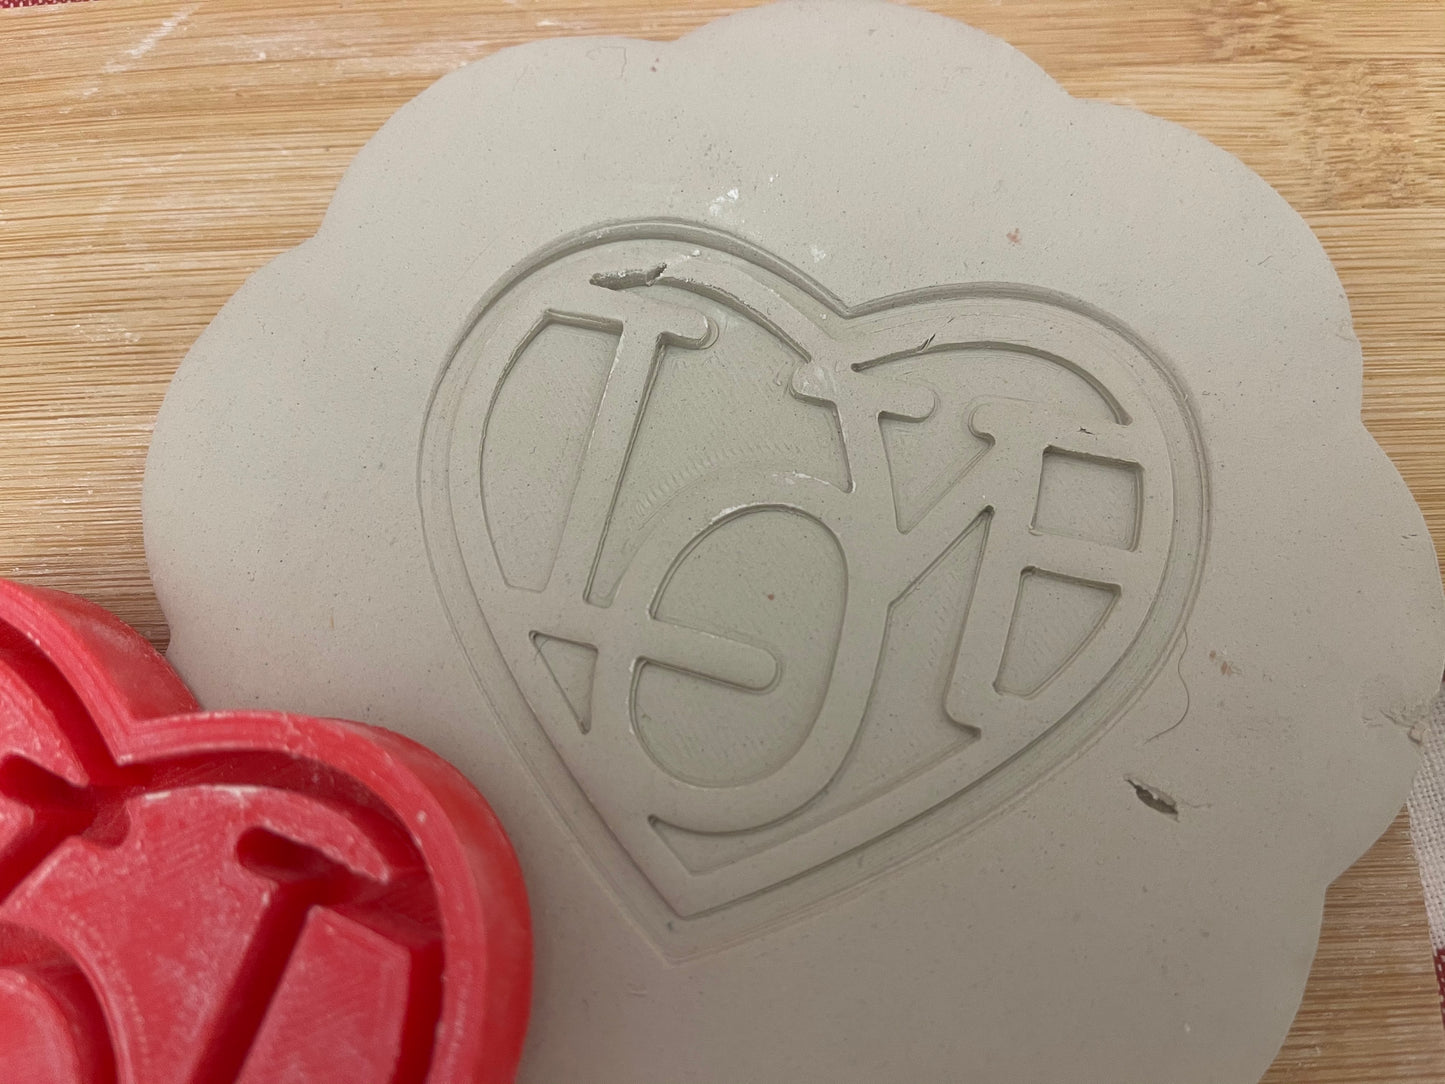 Heart with "LOVE" word stamp - plastic 3D printed, multiple sizes